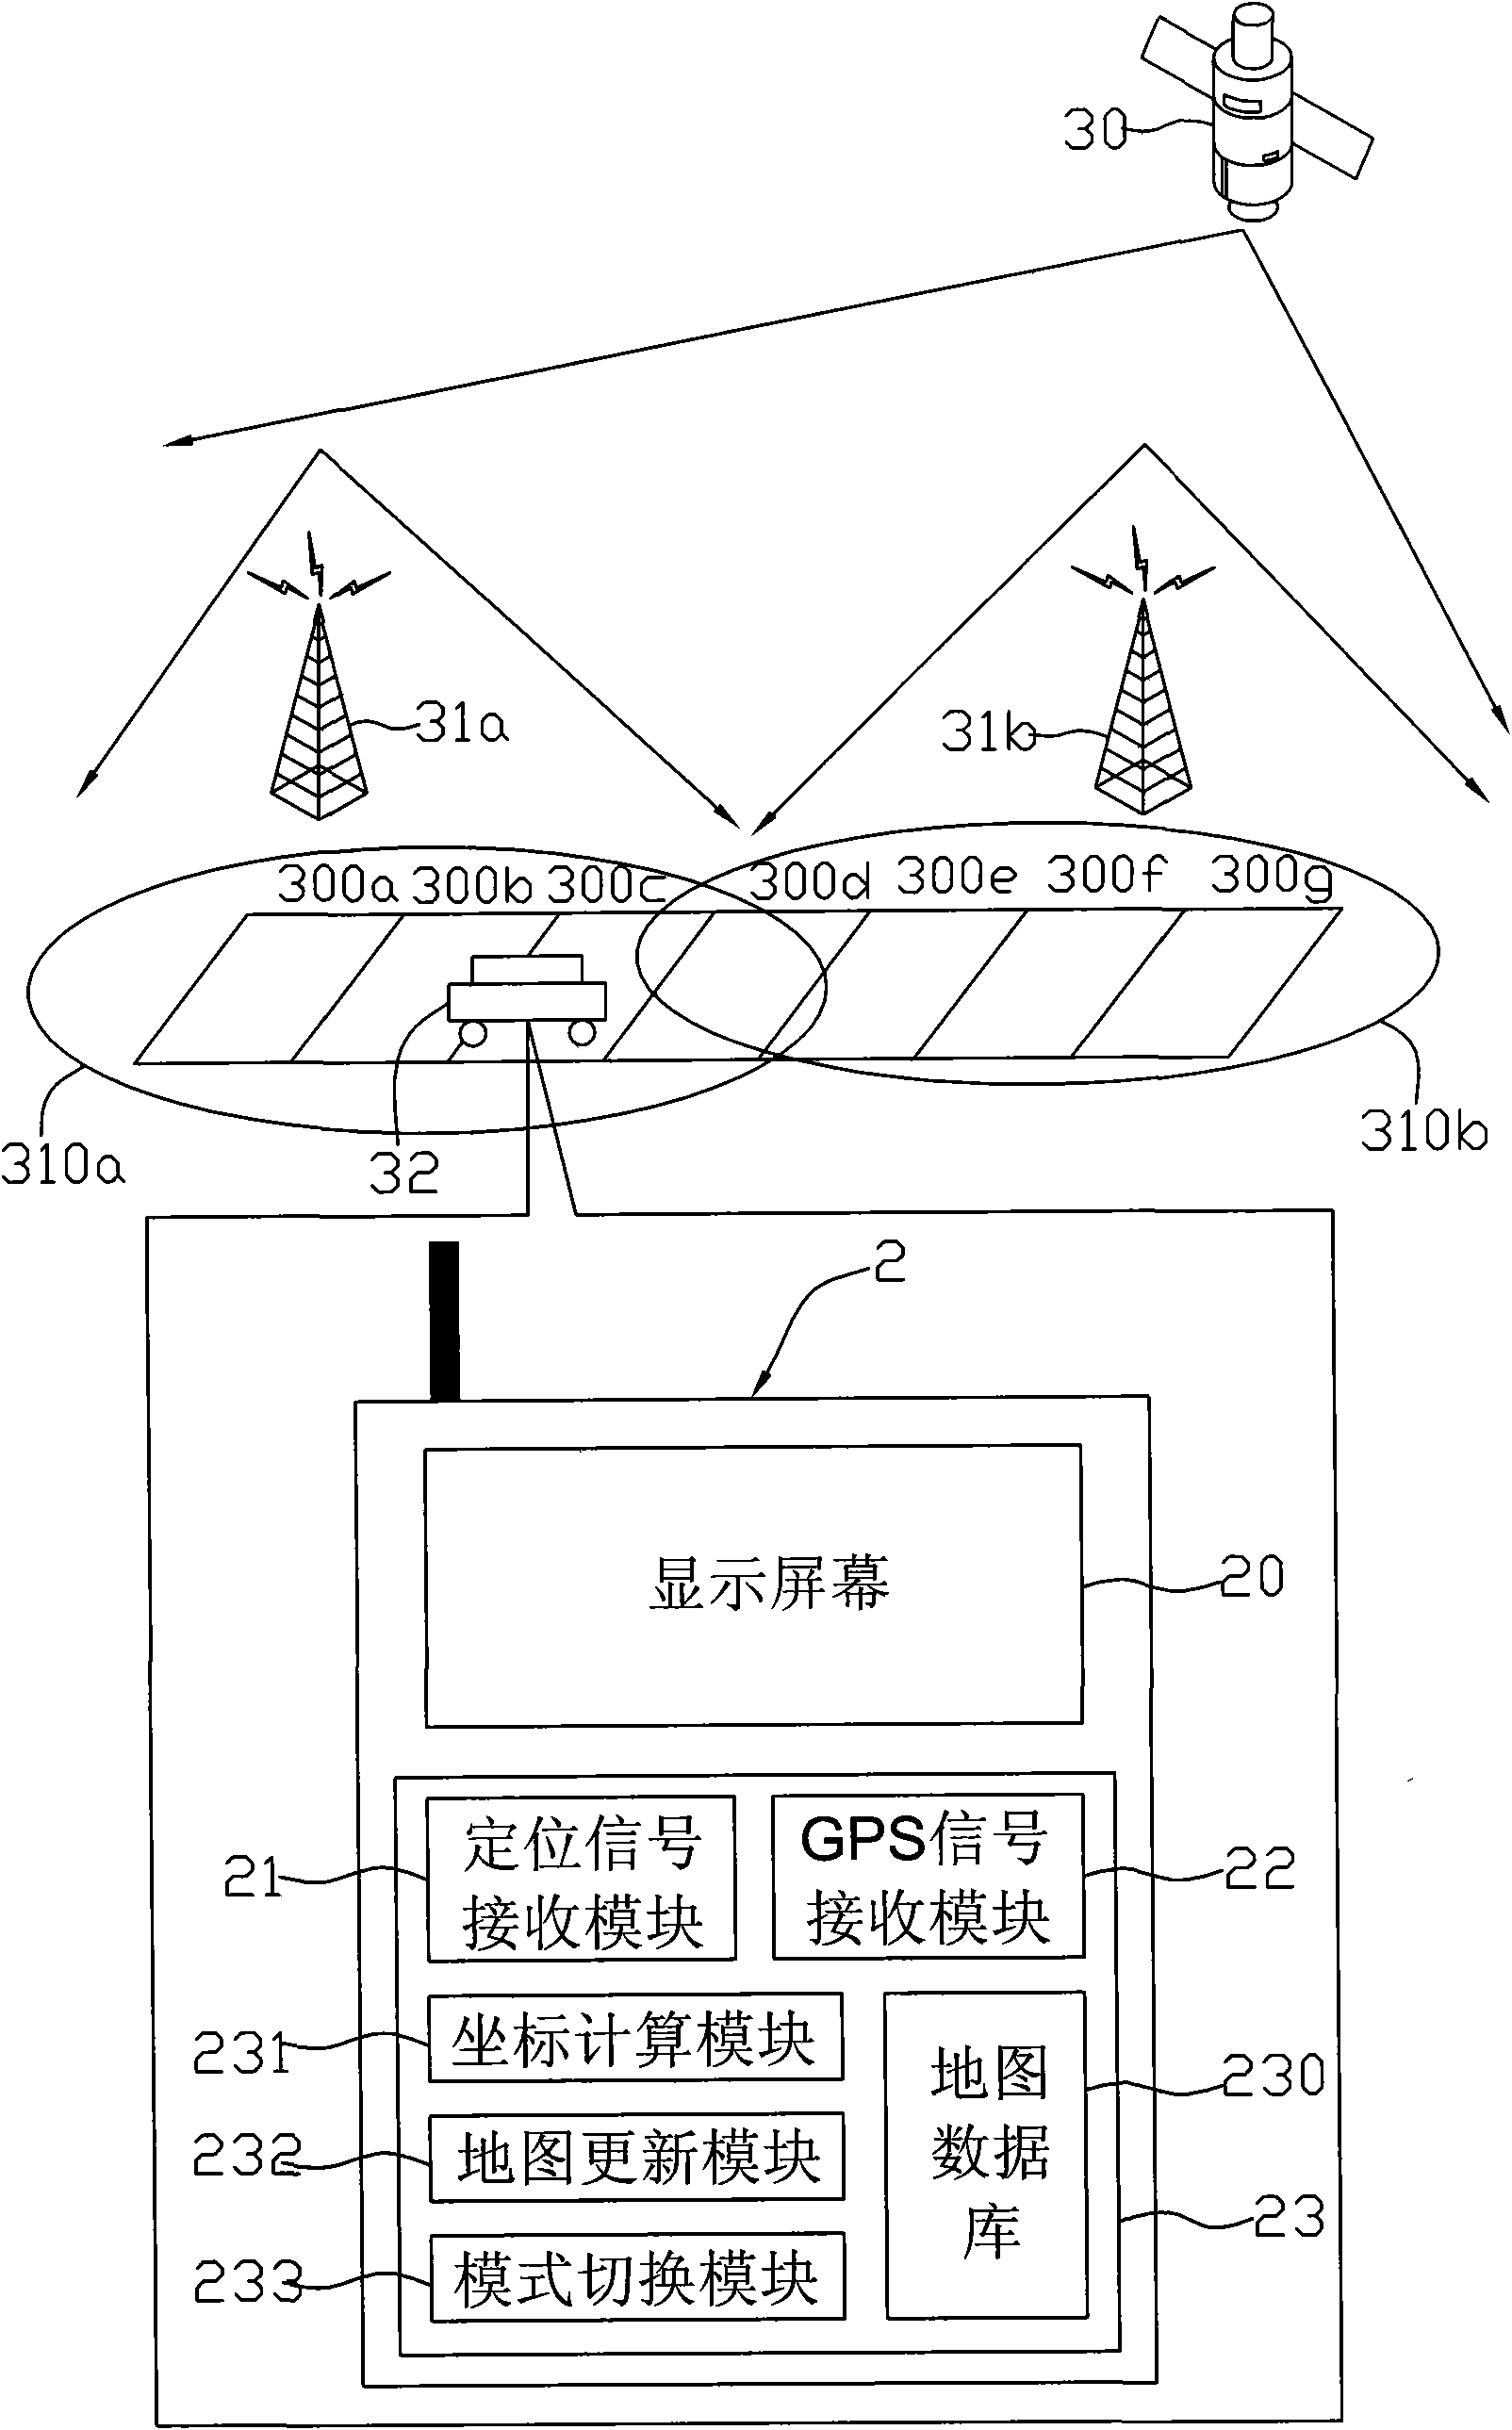 Map information updating device and method